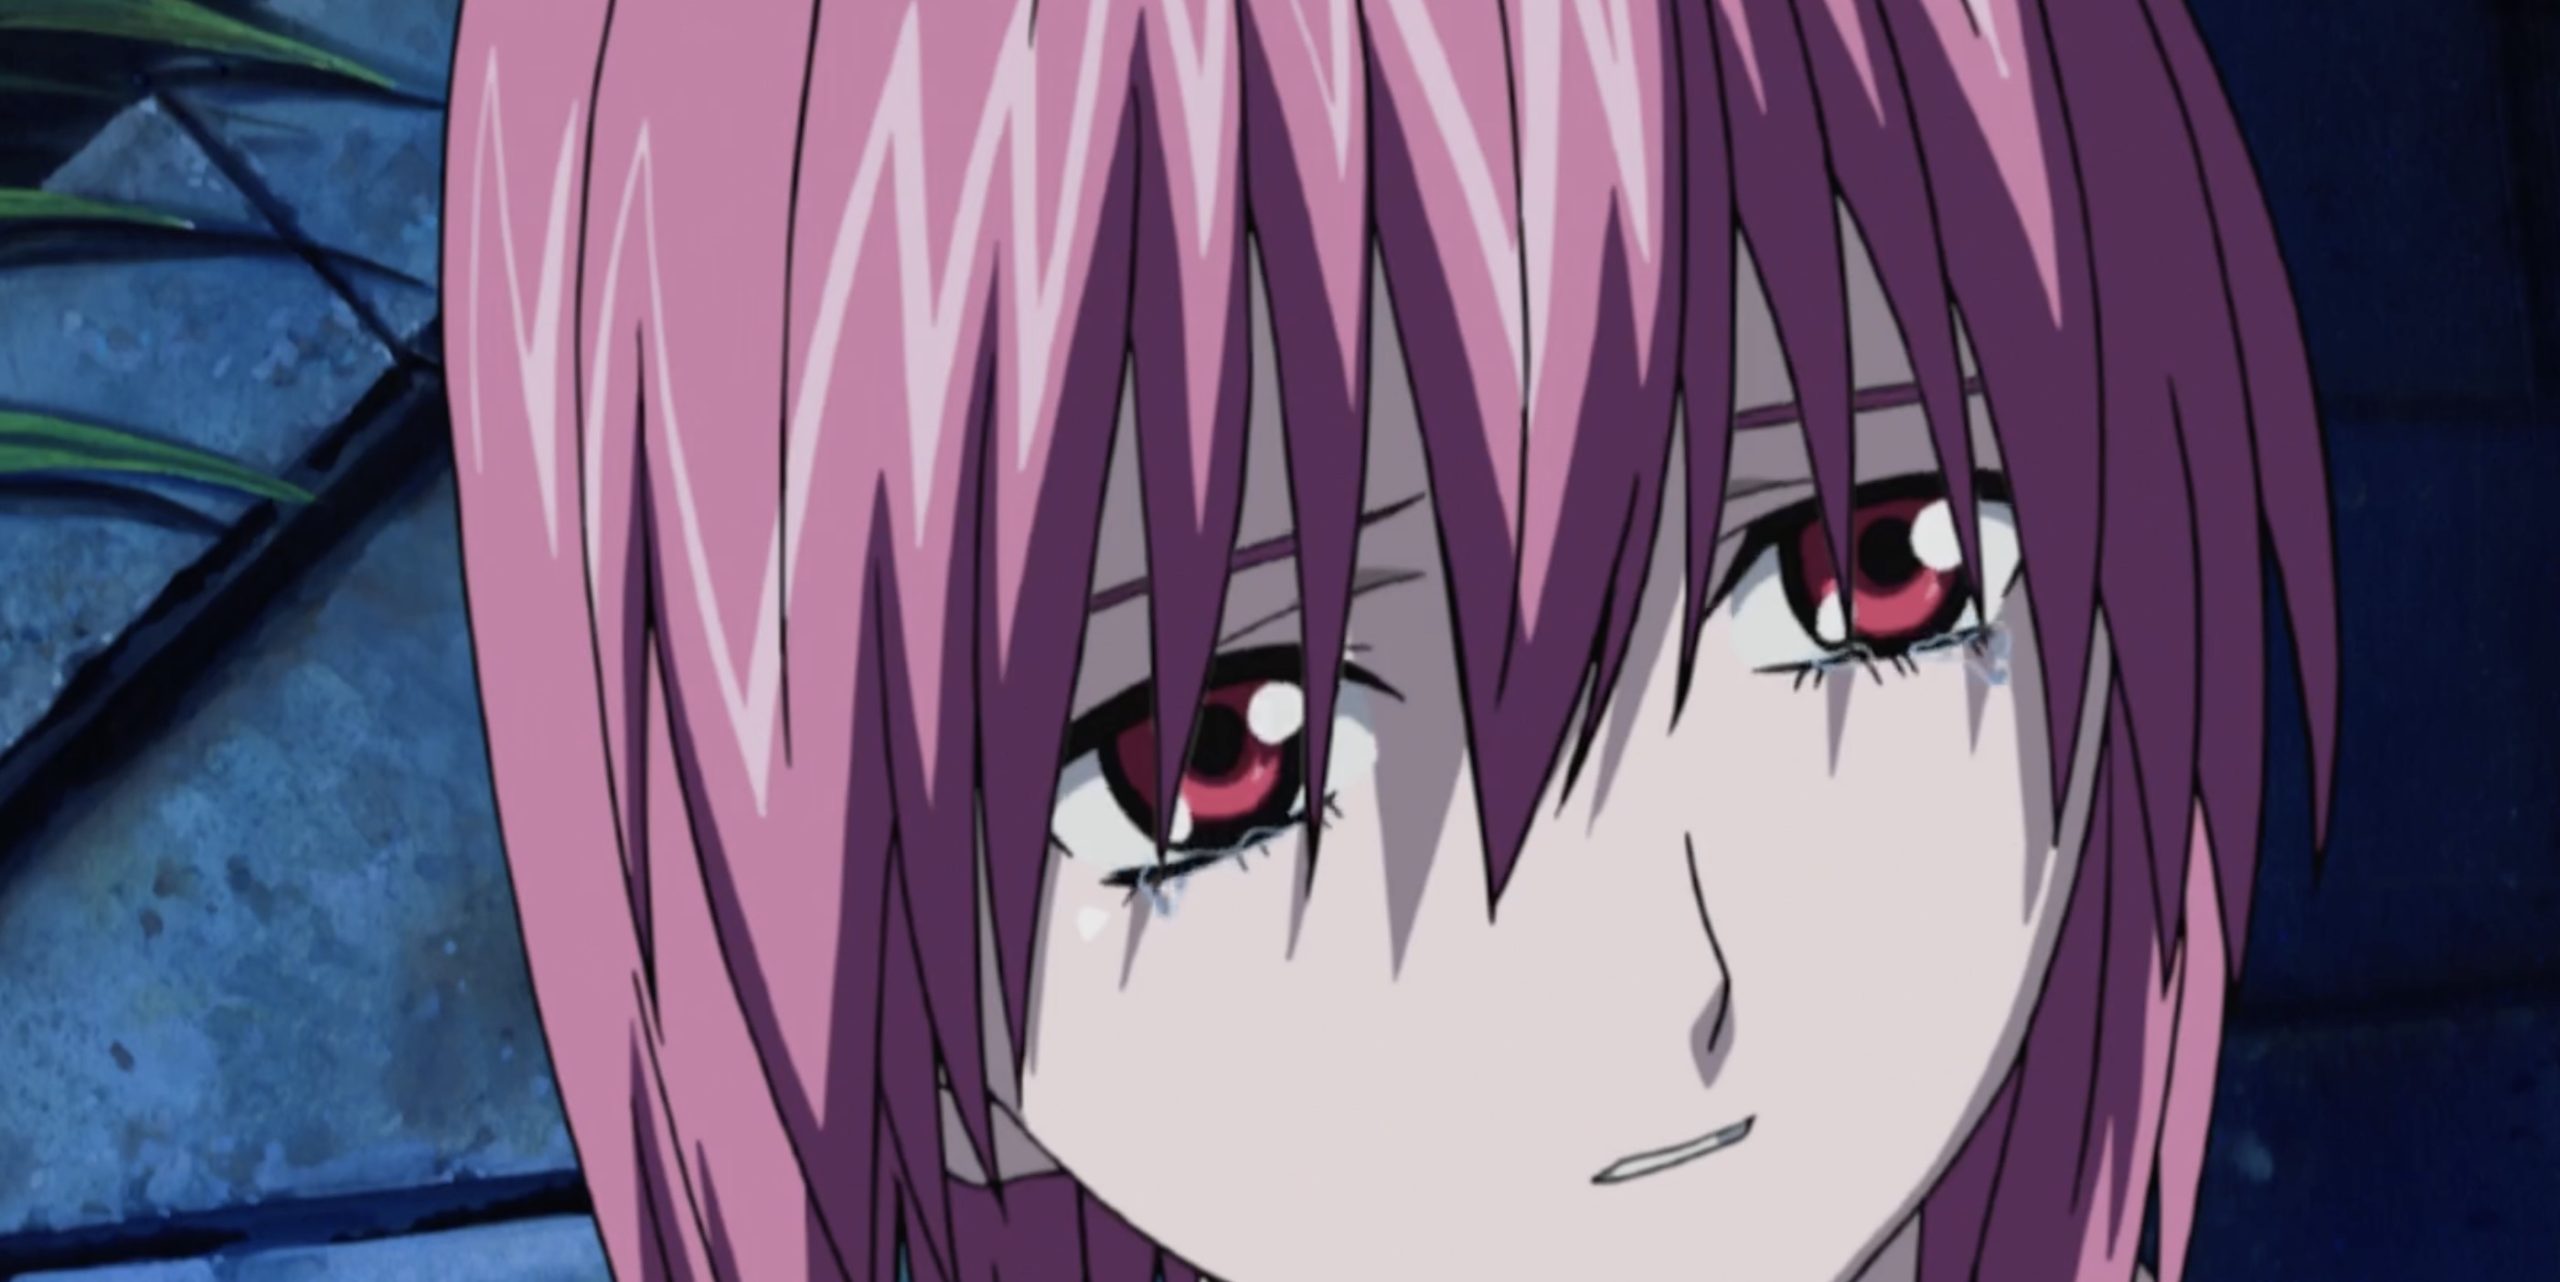 1707827670 191 The Real Reason Why Fans Hate The Elfen Lied Anime